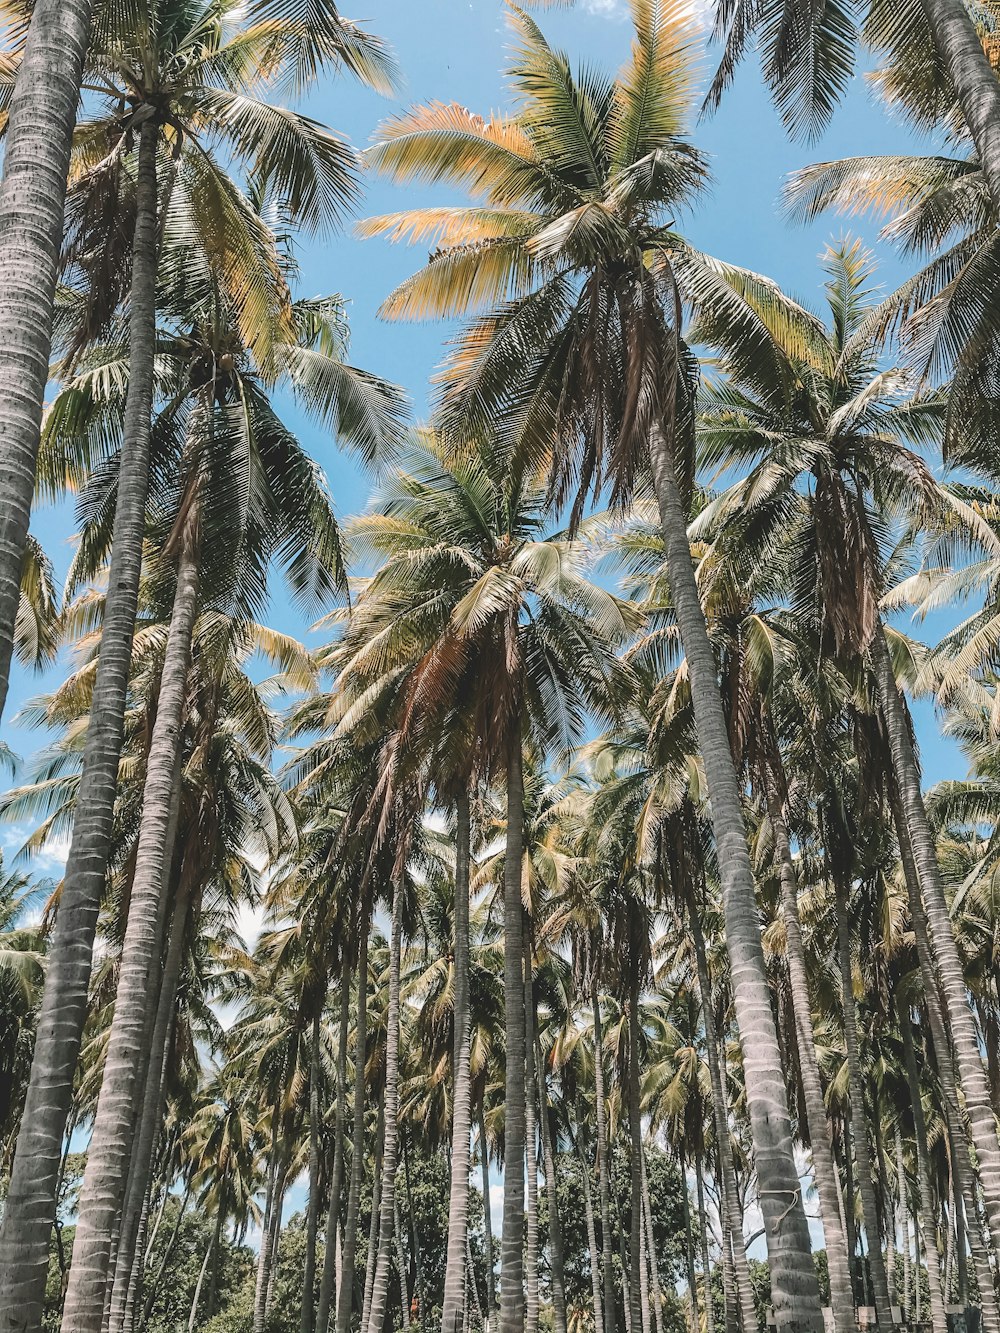 a bunch of palm trees with a blue sky in the background